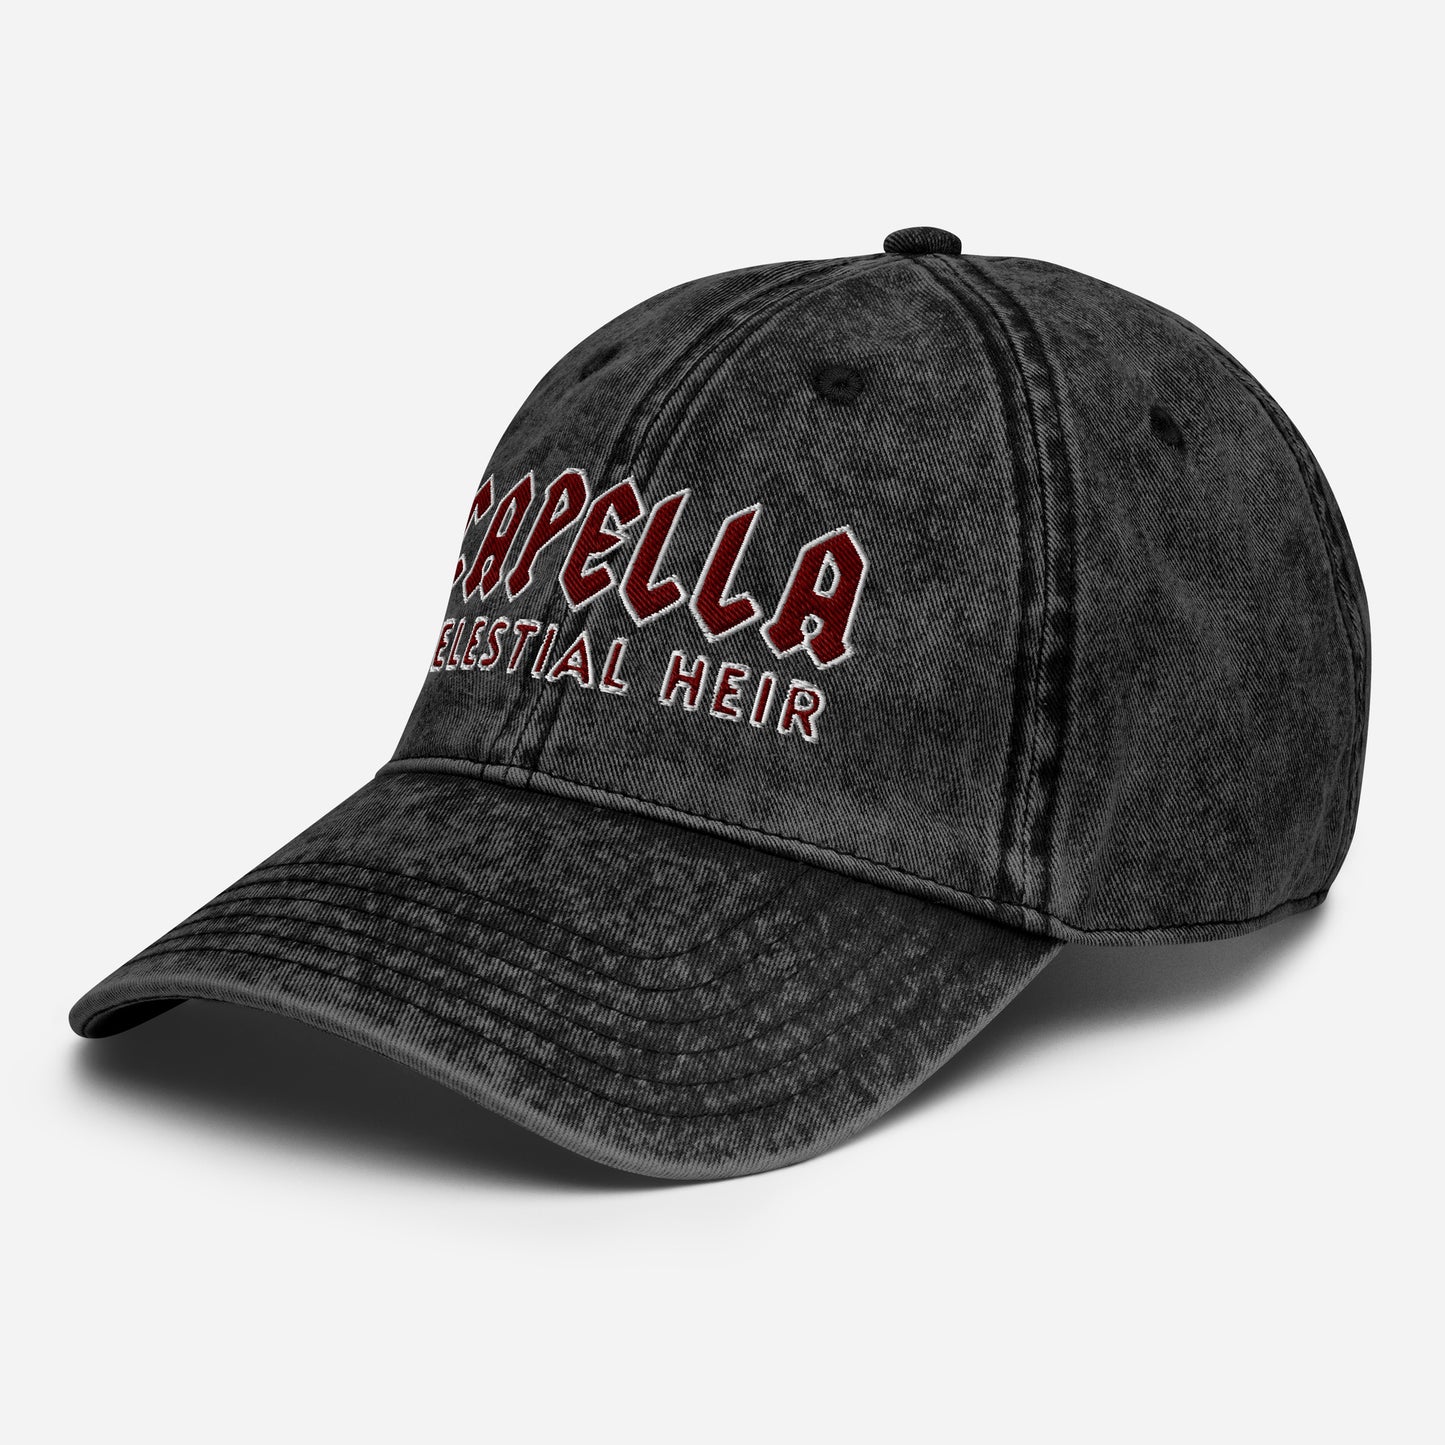 Capella Zodiac Academy Embroidered Vintage Hat